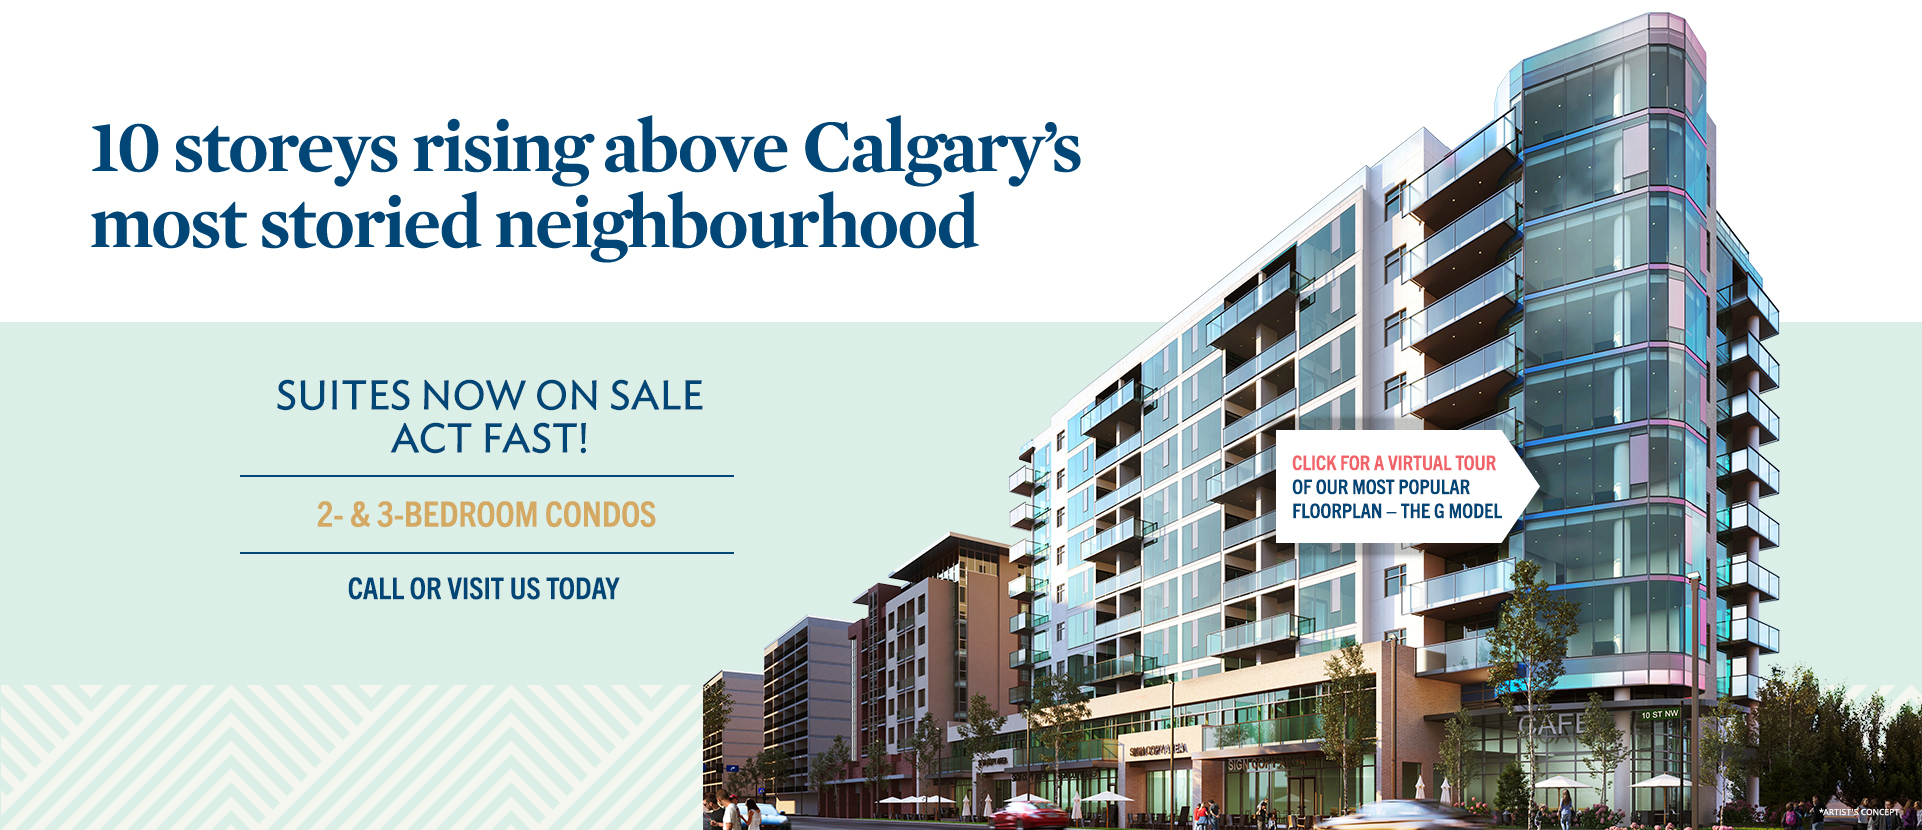 Text: 10 storeys rising above Calgary's most storied neighbourhood. Act Now. Final Suites Going Fast. Graphic: Rendering of the Theodore in Kensington